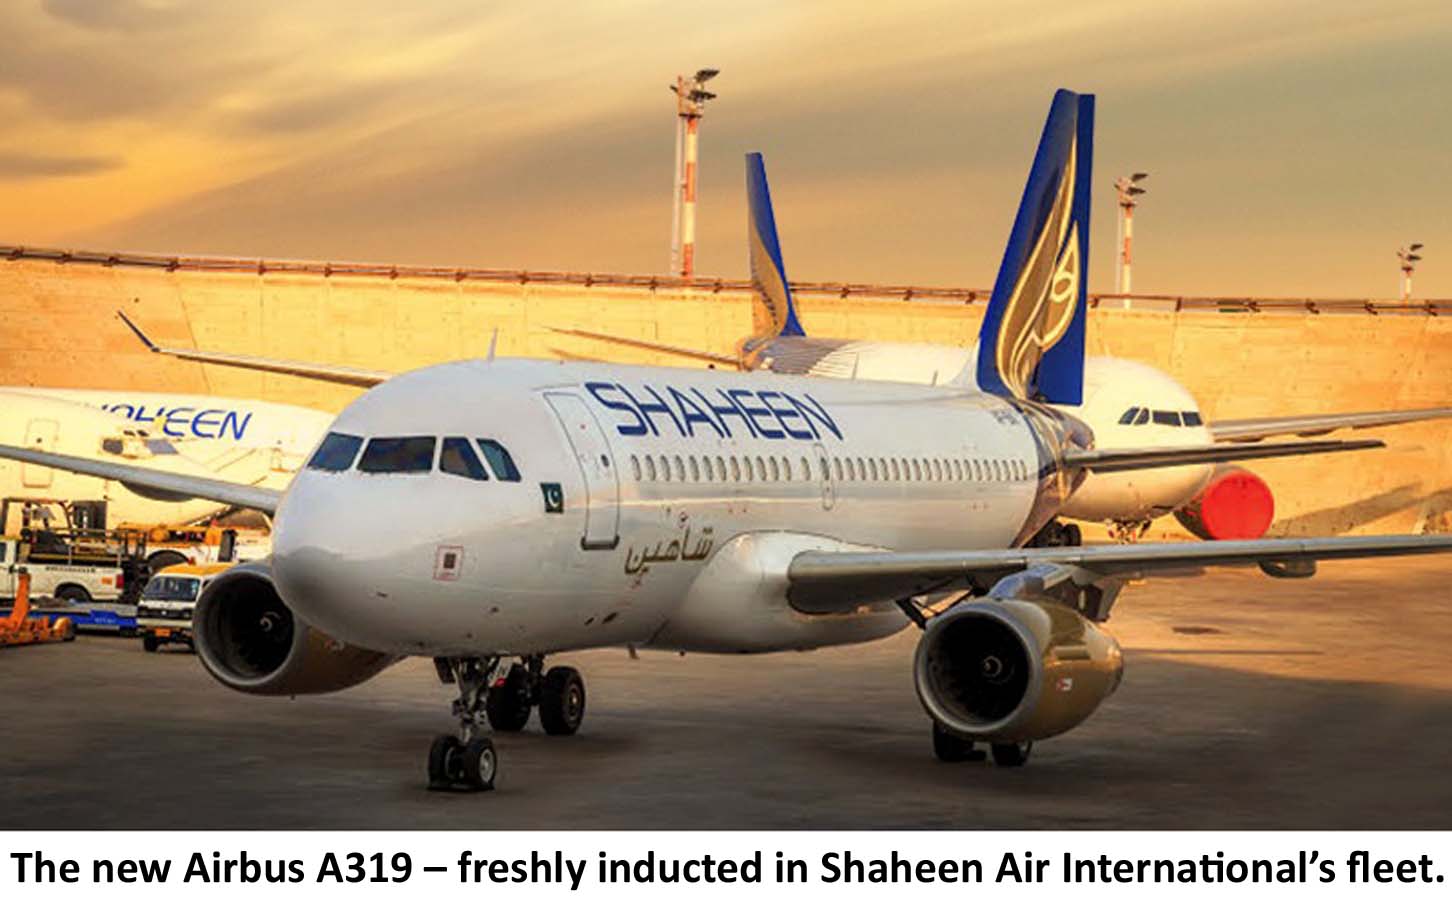 Shaheen Air Inducts Third Airbus A319 into its Fleet